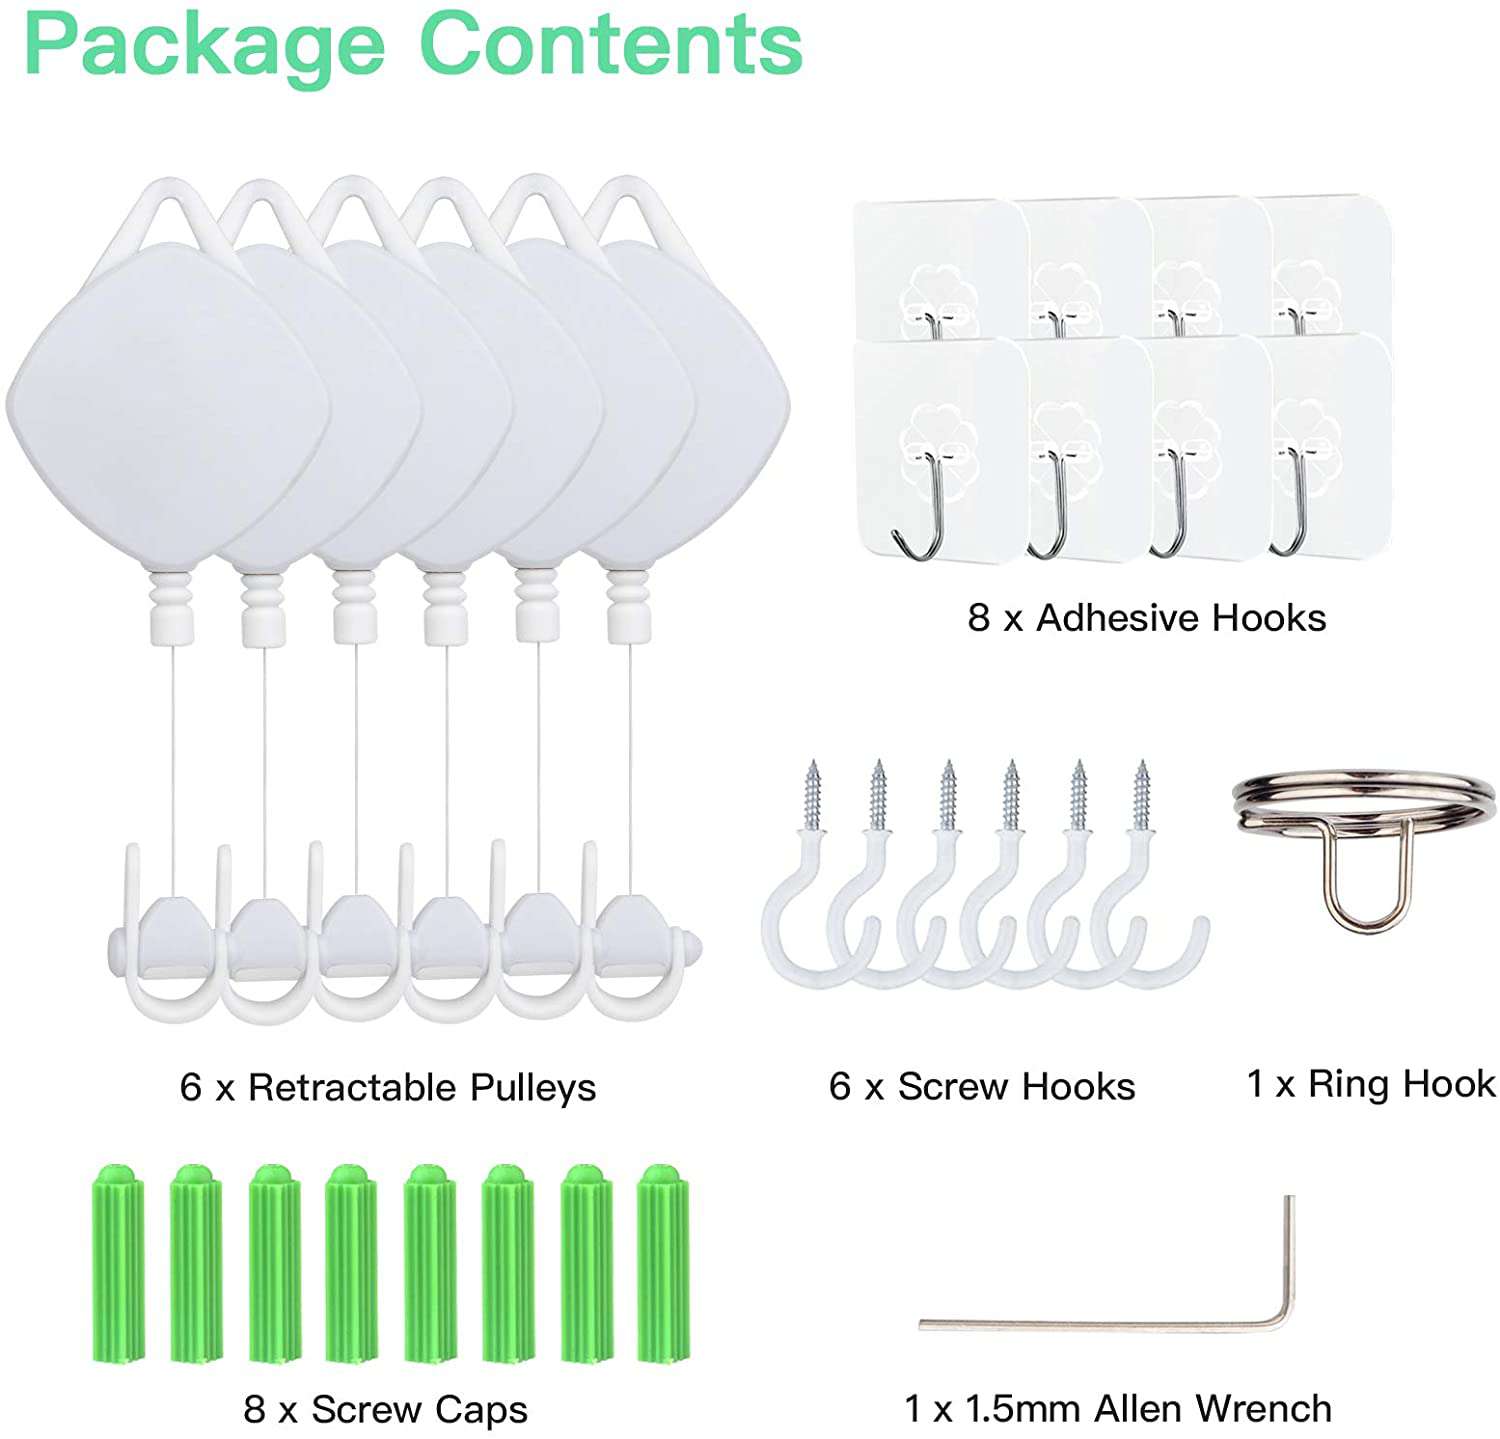 Items included in the package: Adhesive Hooks, Retractable Pulleys, Screw Caps, Screw Hooks, etc